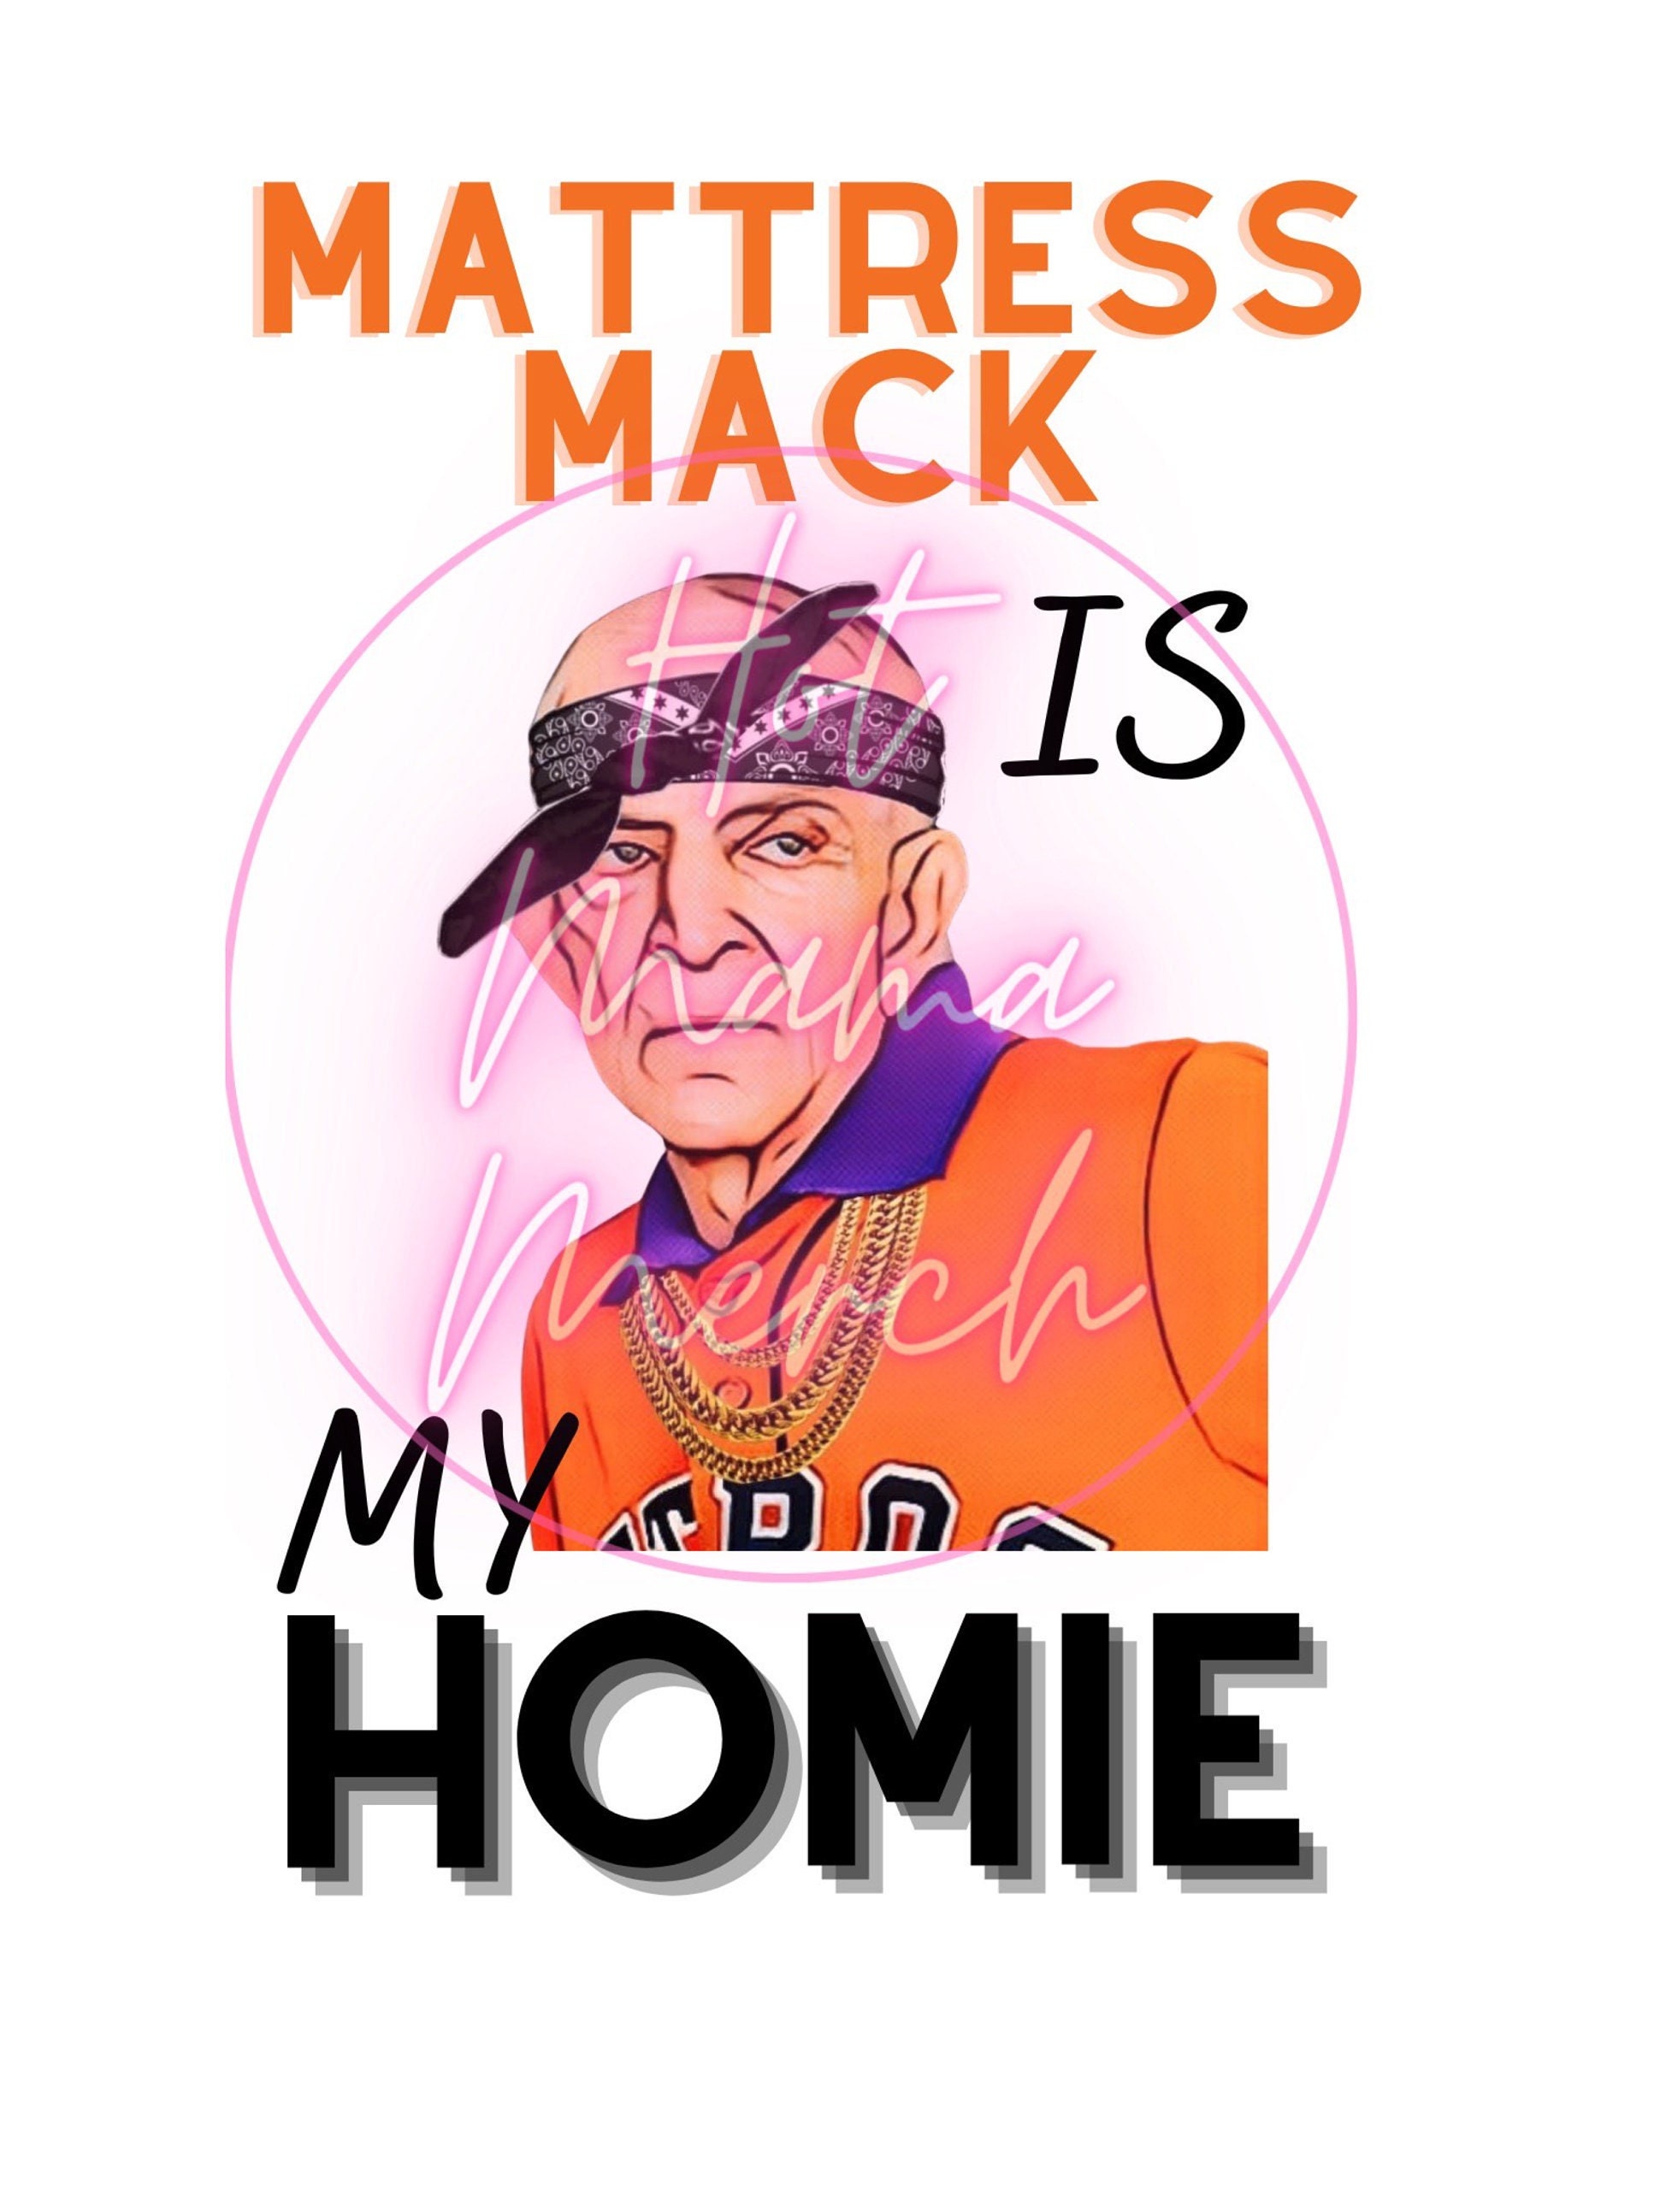 Mattress Mack Haters Gonna Hate Ornament Astro World Series 2022 - Trends  Bedding